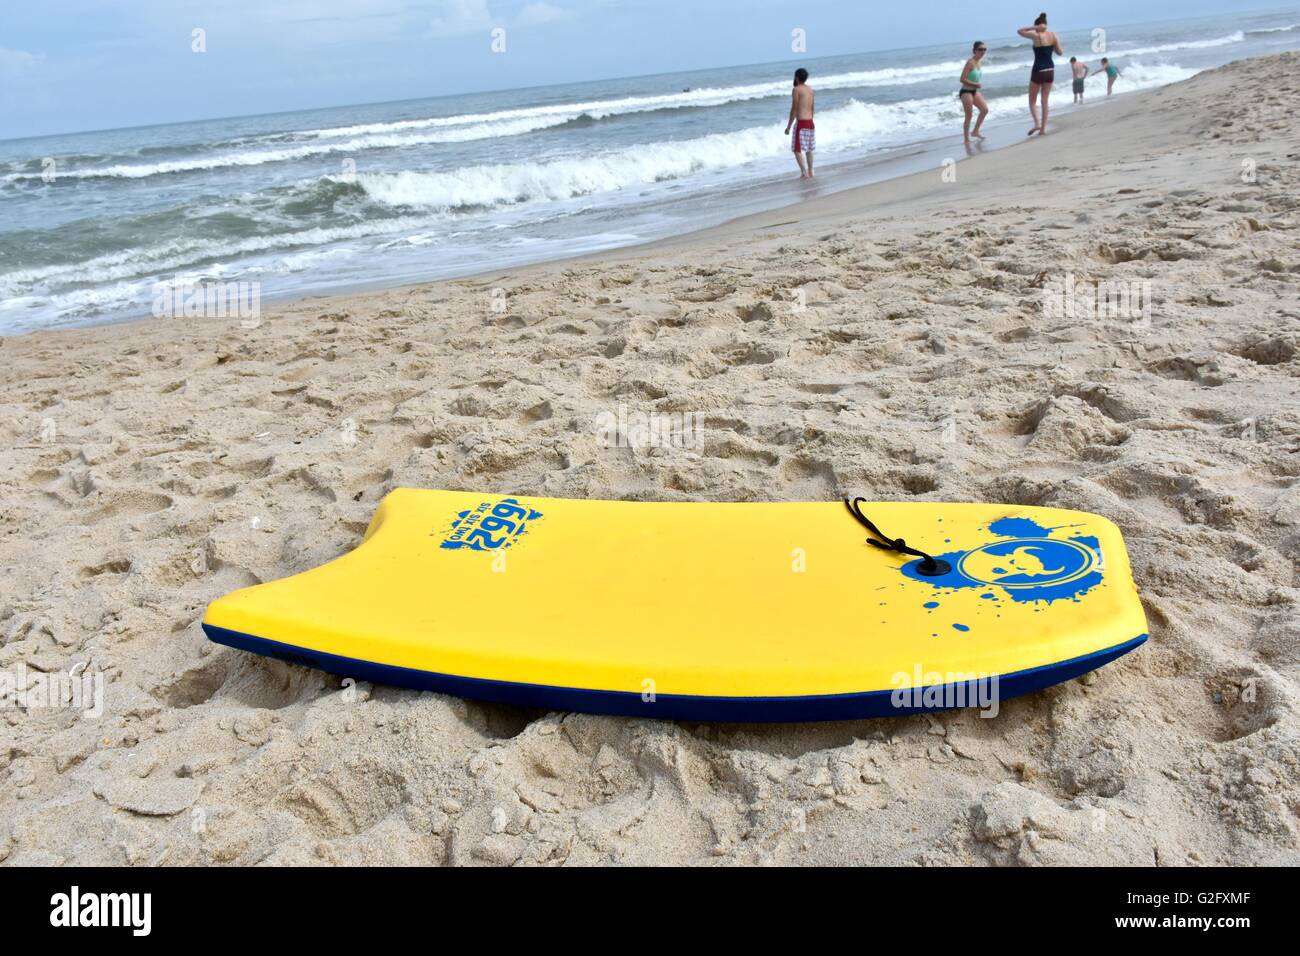 A yellow boogie board laying in the sand on the beach Stock Photo